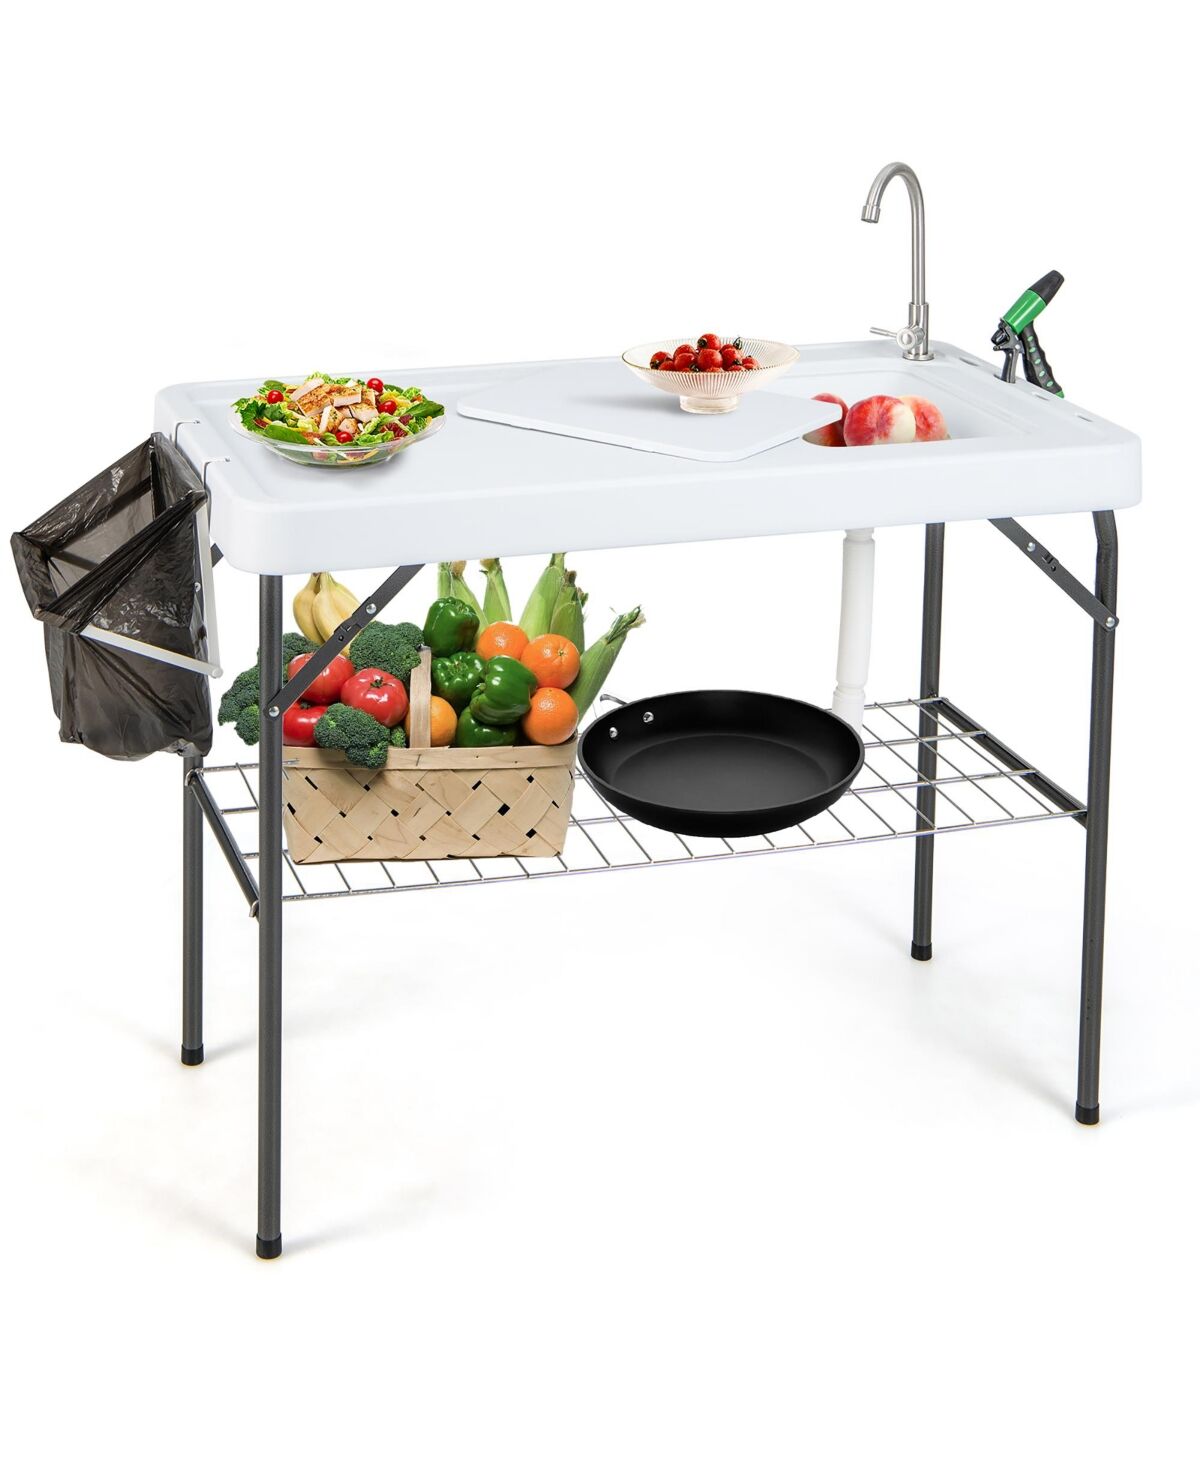 Costway Folding Fish Cleaning Table Portable Camping Table with Faucet Hose Grid Rack - White